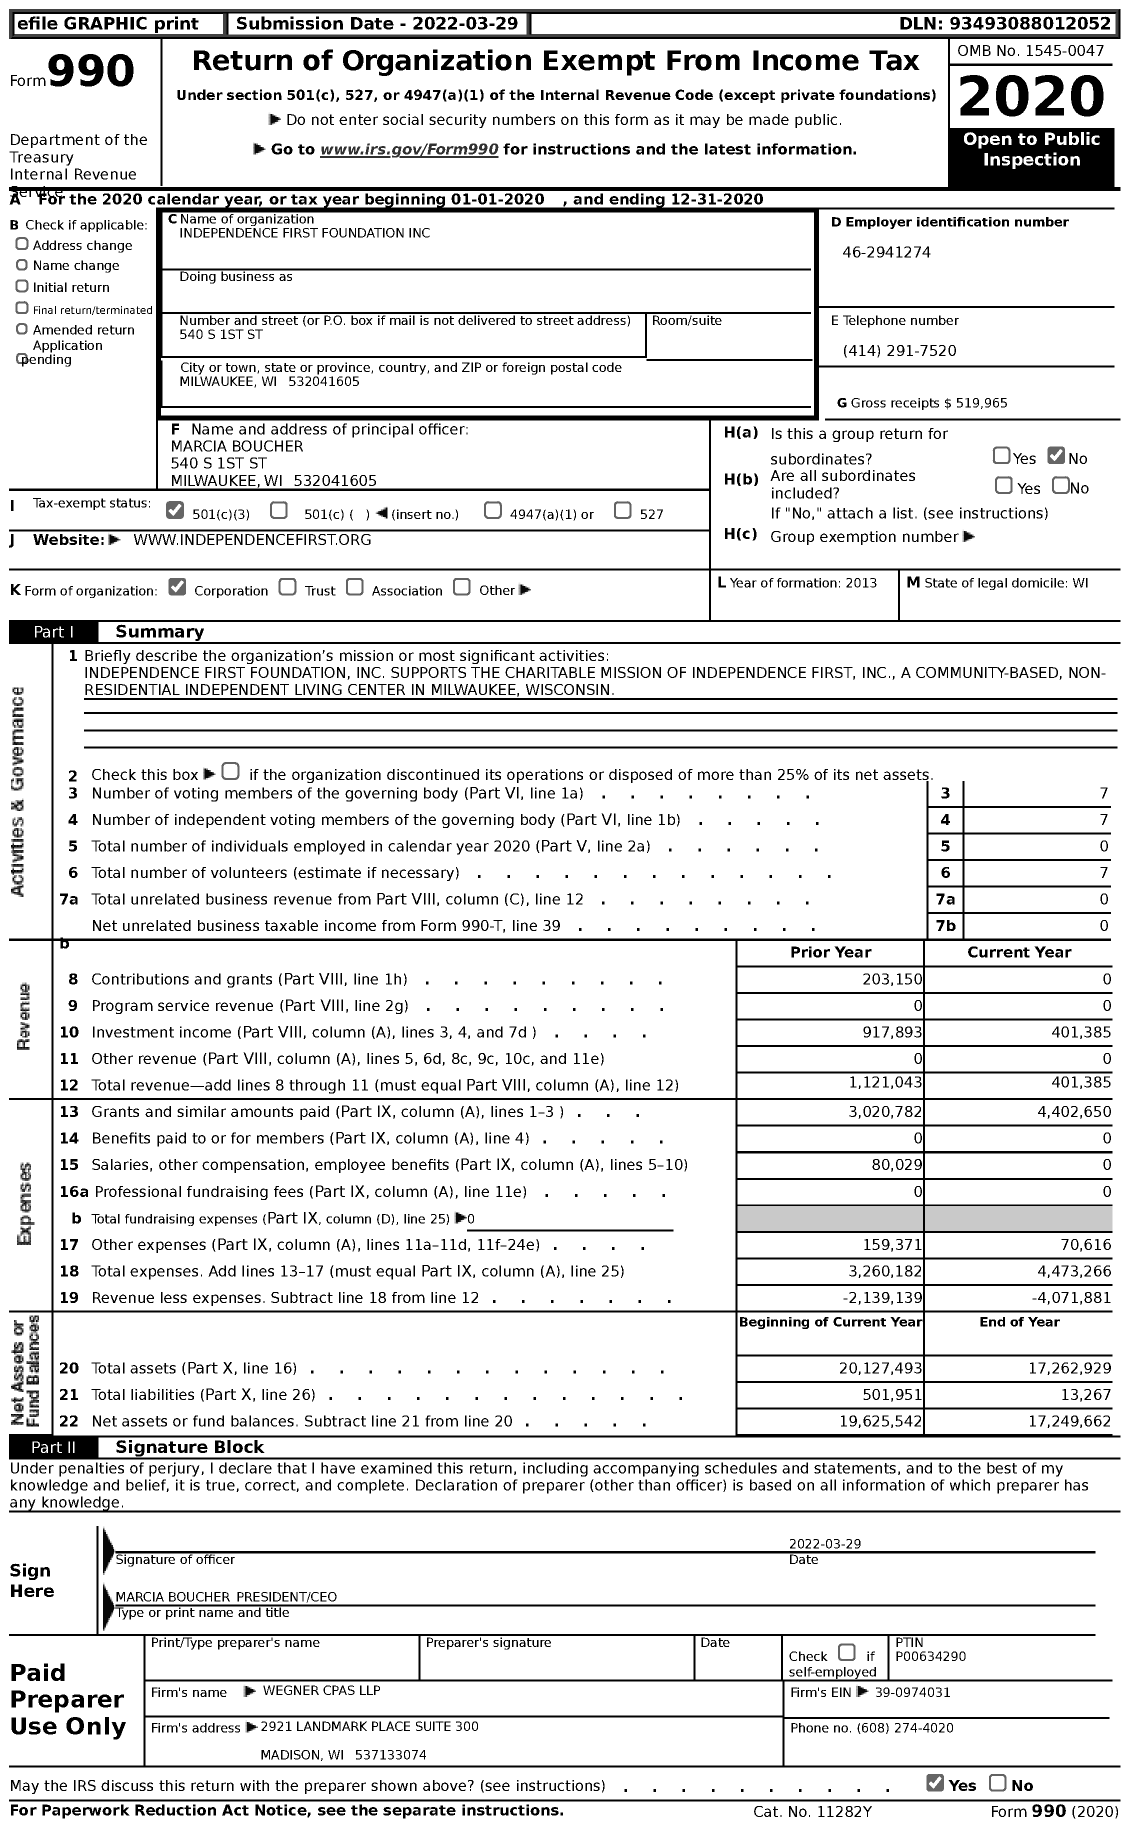 Image of first page of 2020 Form 990 for Independencefirst First Foundation